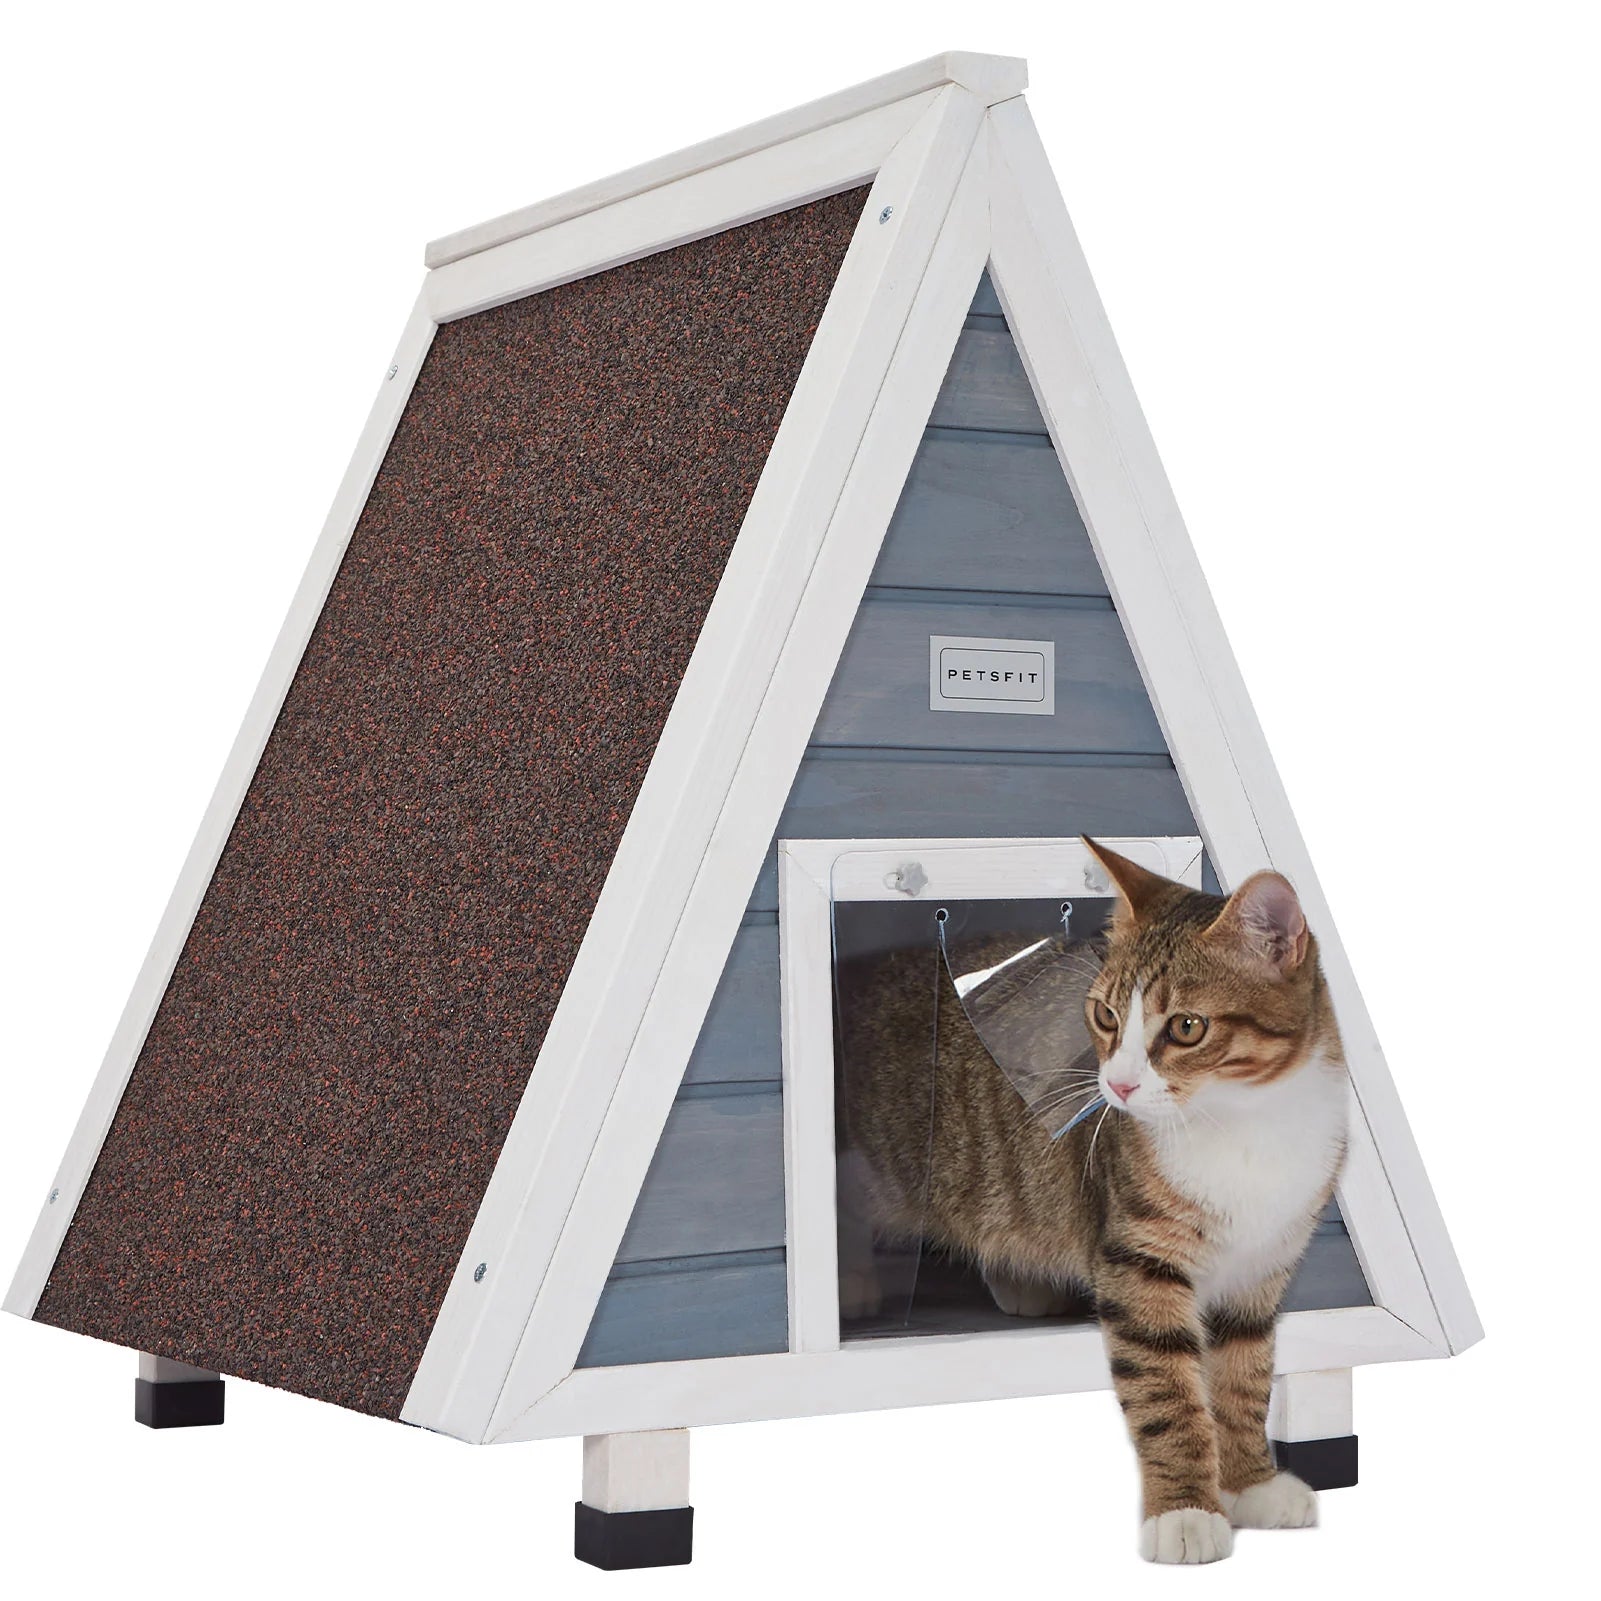 [Petsfit ]-Single Story Triangular Cat House With Foot Stand (Lt Grey)